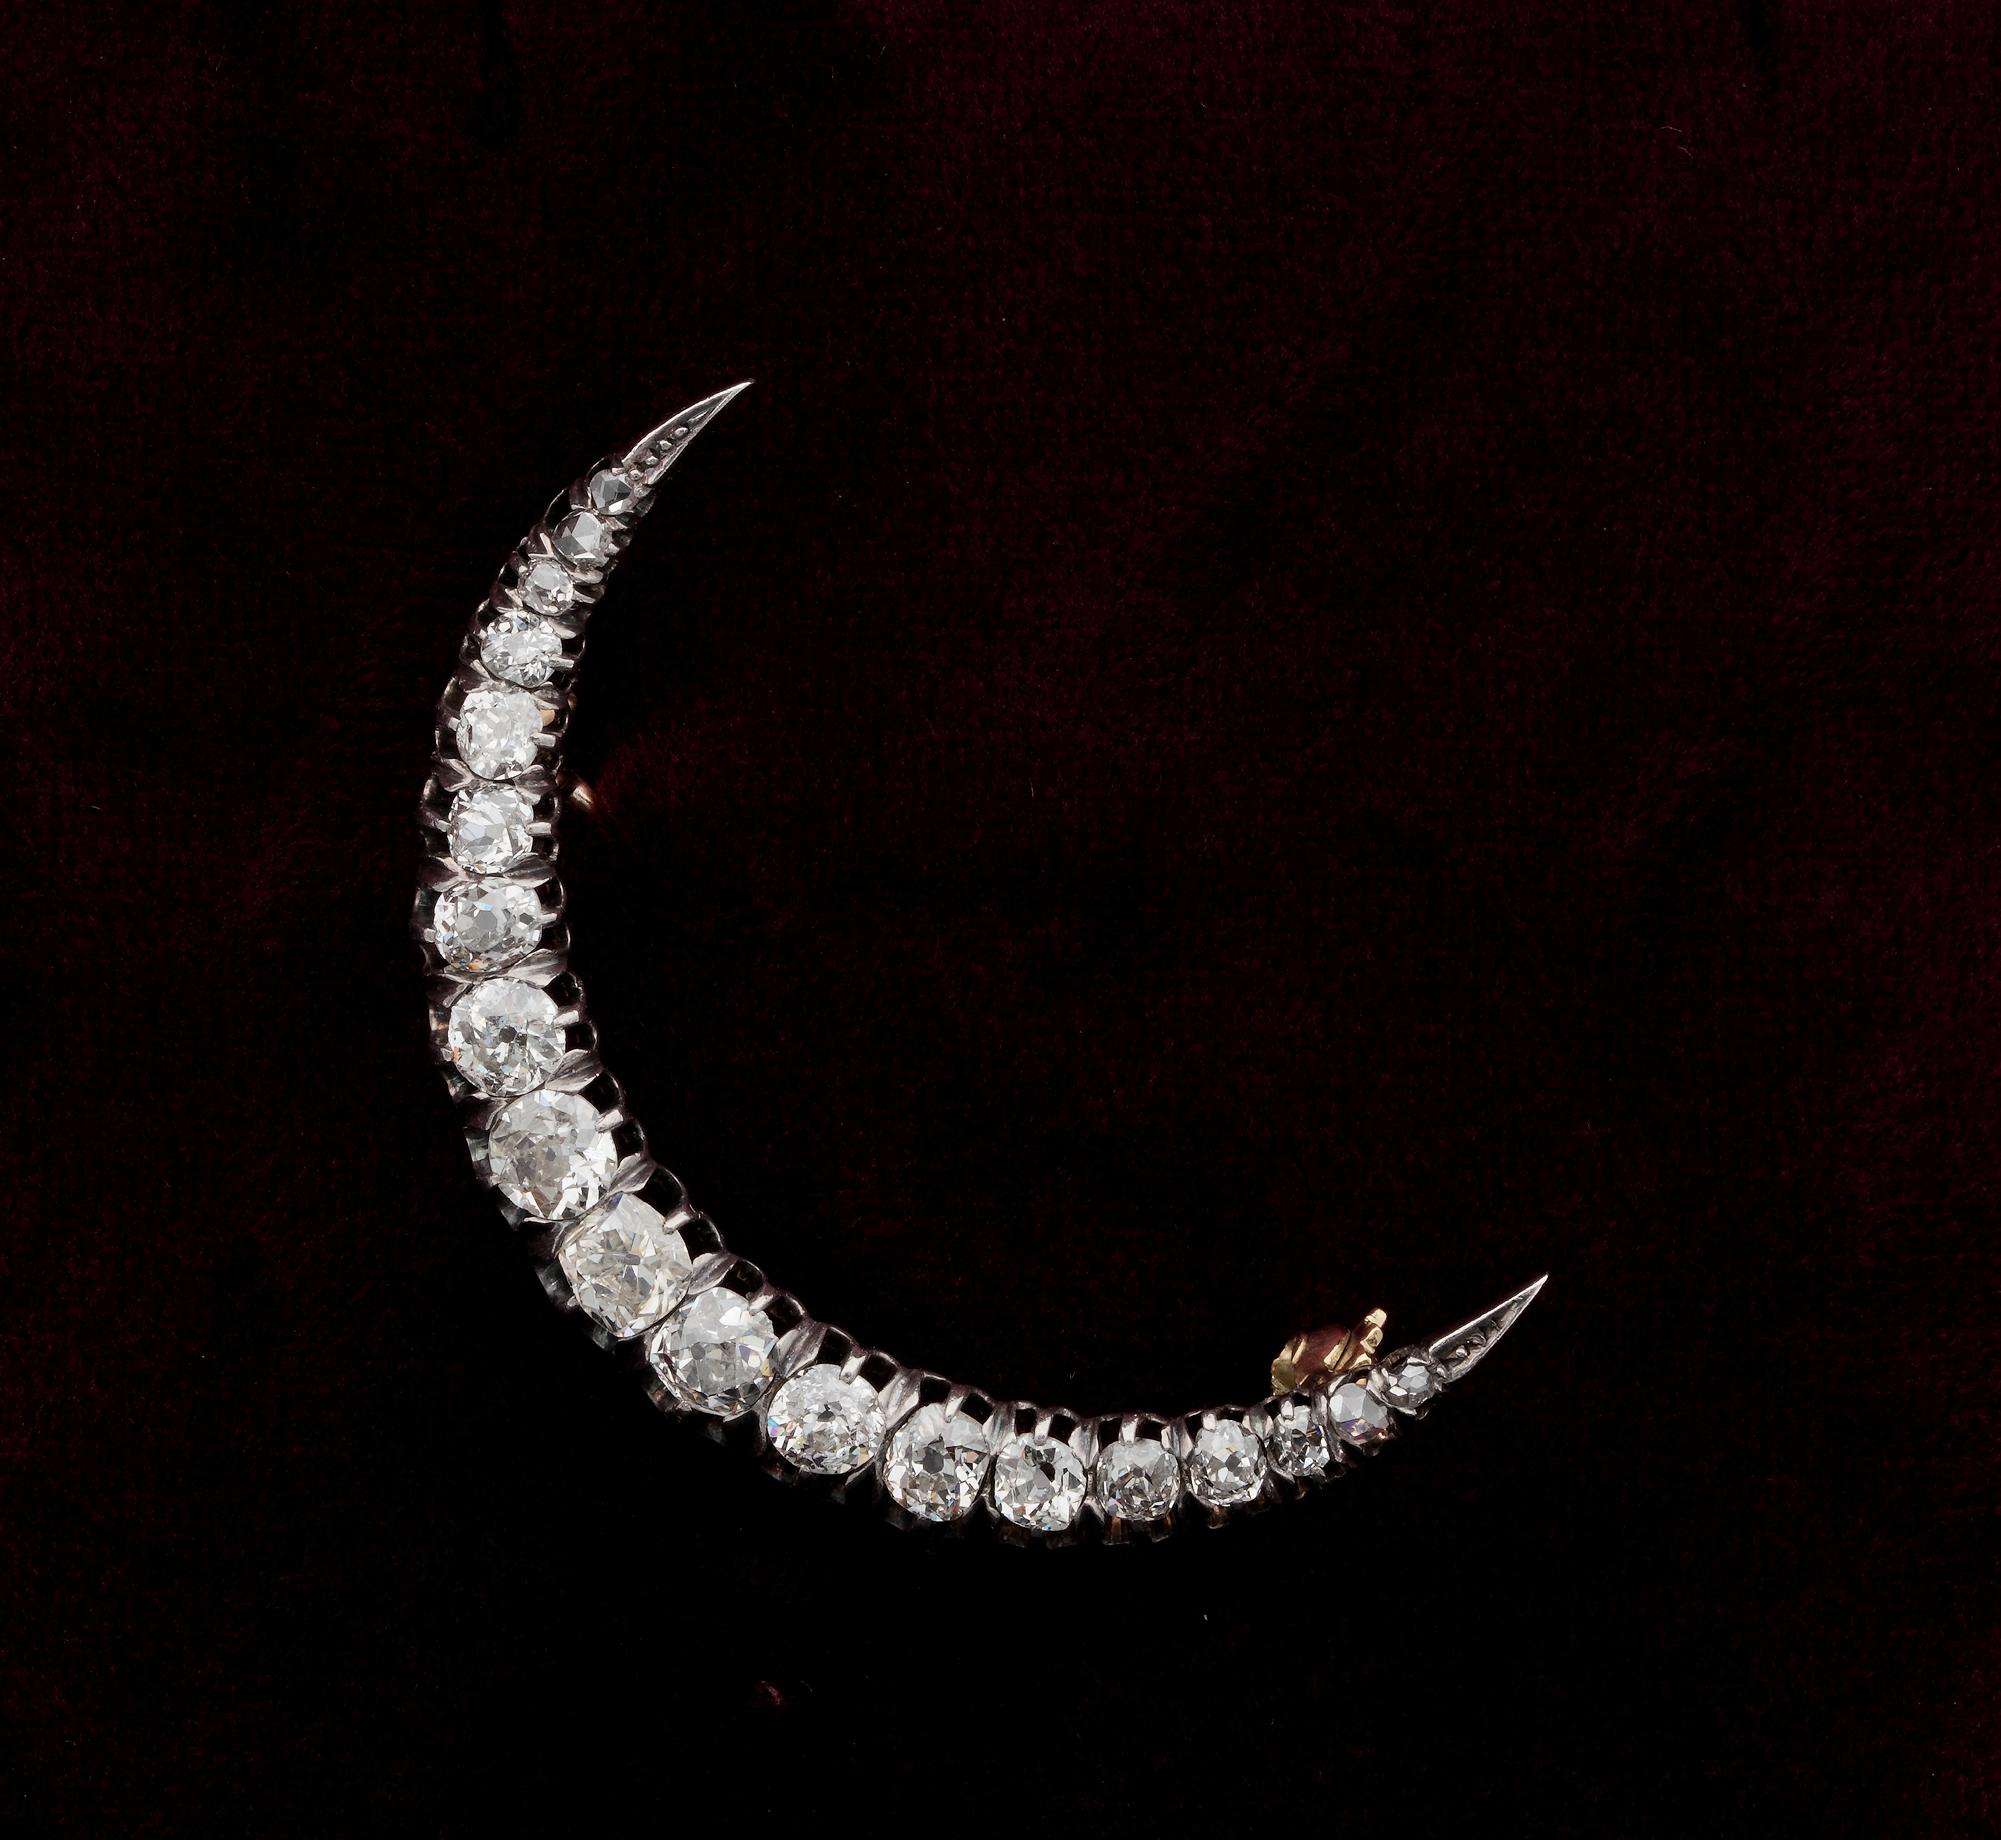 Celestial!

Victorian era Crescent Moon brooch of rare beauty is adorned by an array of graduated in sizes old mine cushion Cut Diamonds and rose cut as finials
It holds approx 2.20 Ct of TCW Diamonds rated G/H/I VVS/SI
The Moon is hand crafted of